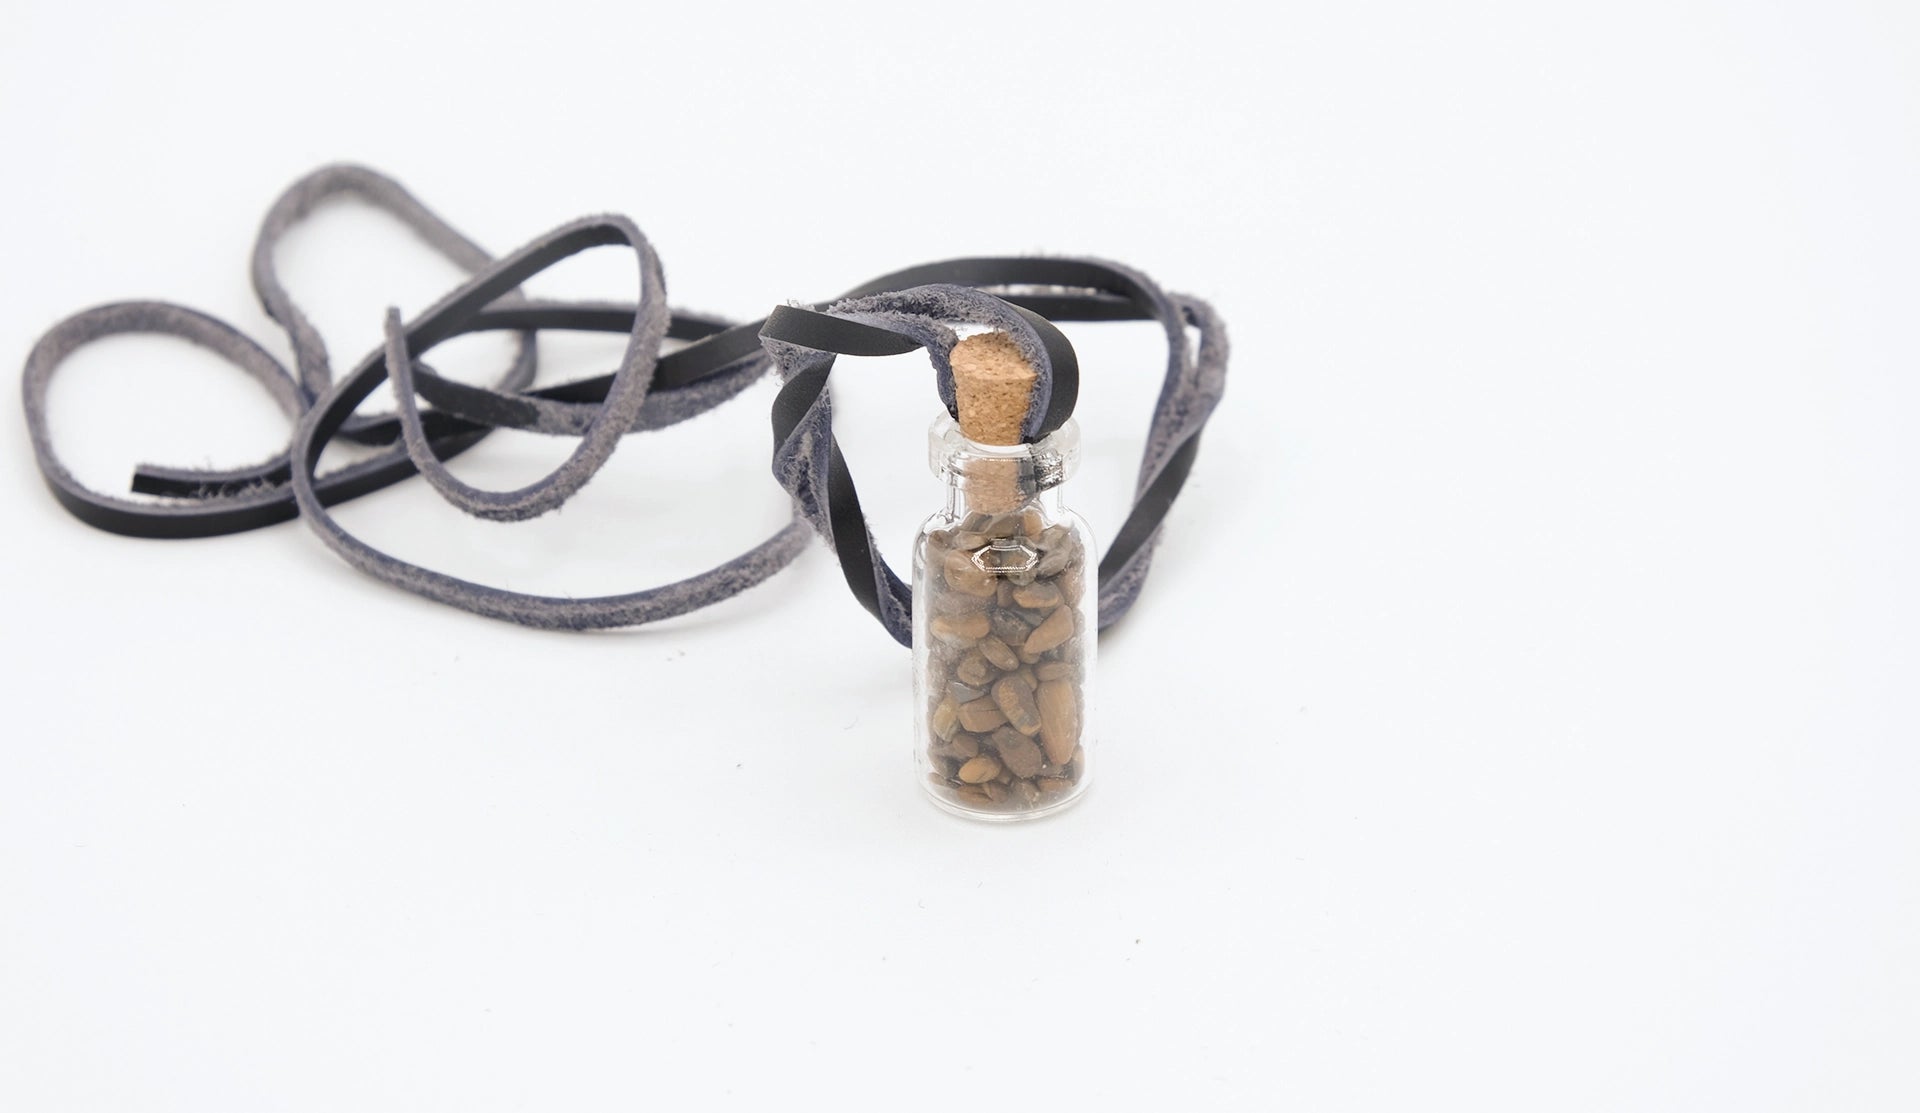 pendant made with a little glass bottle filled with tiger's eye shards